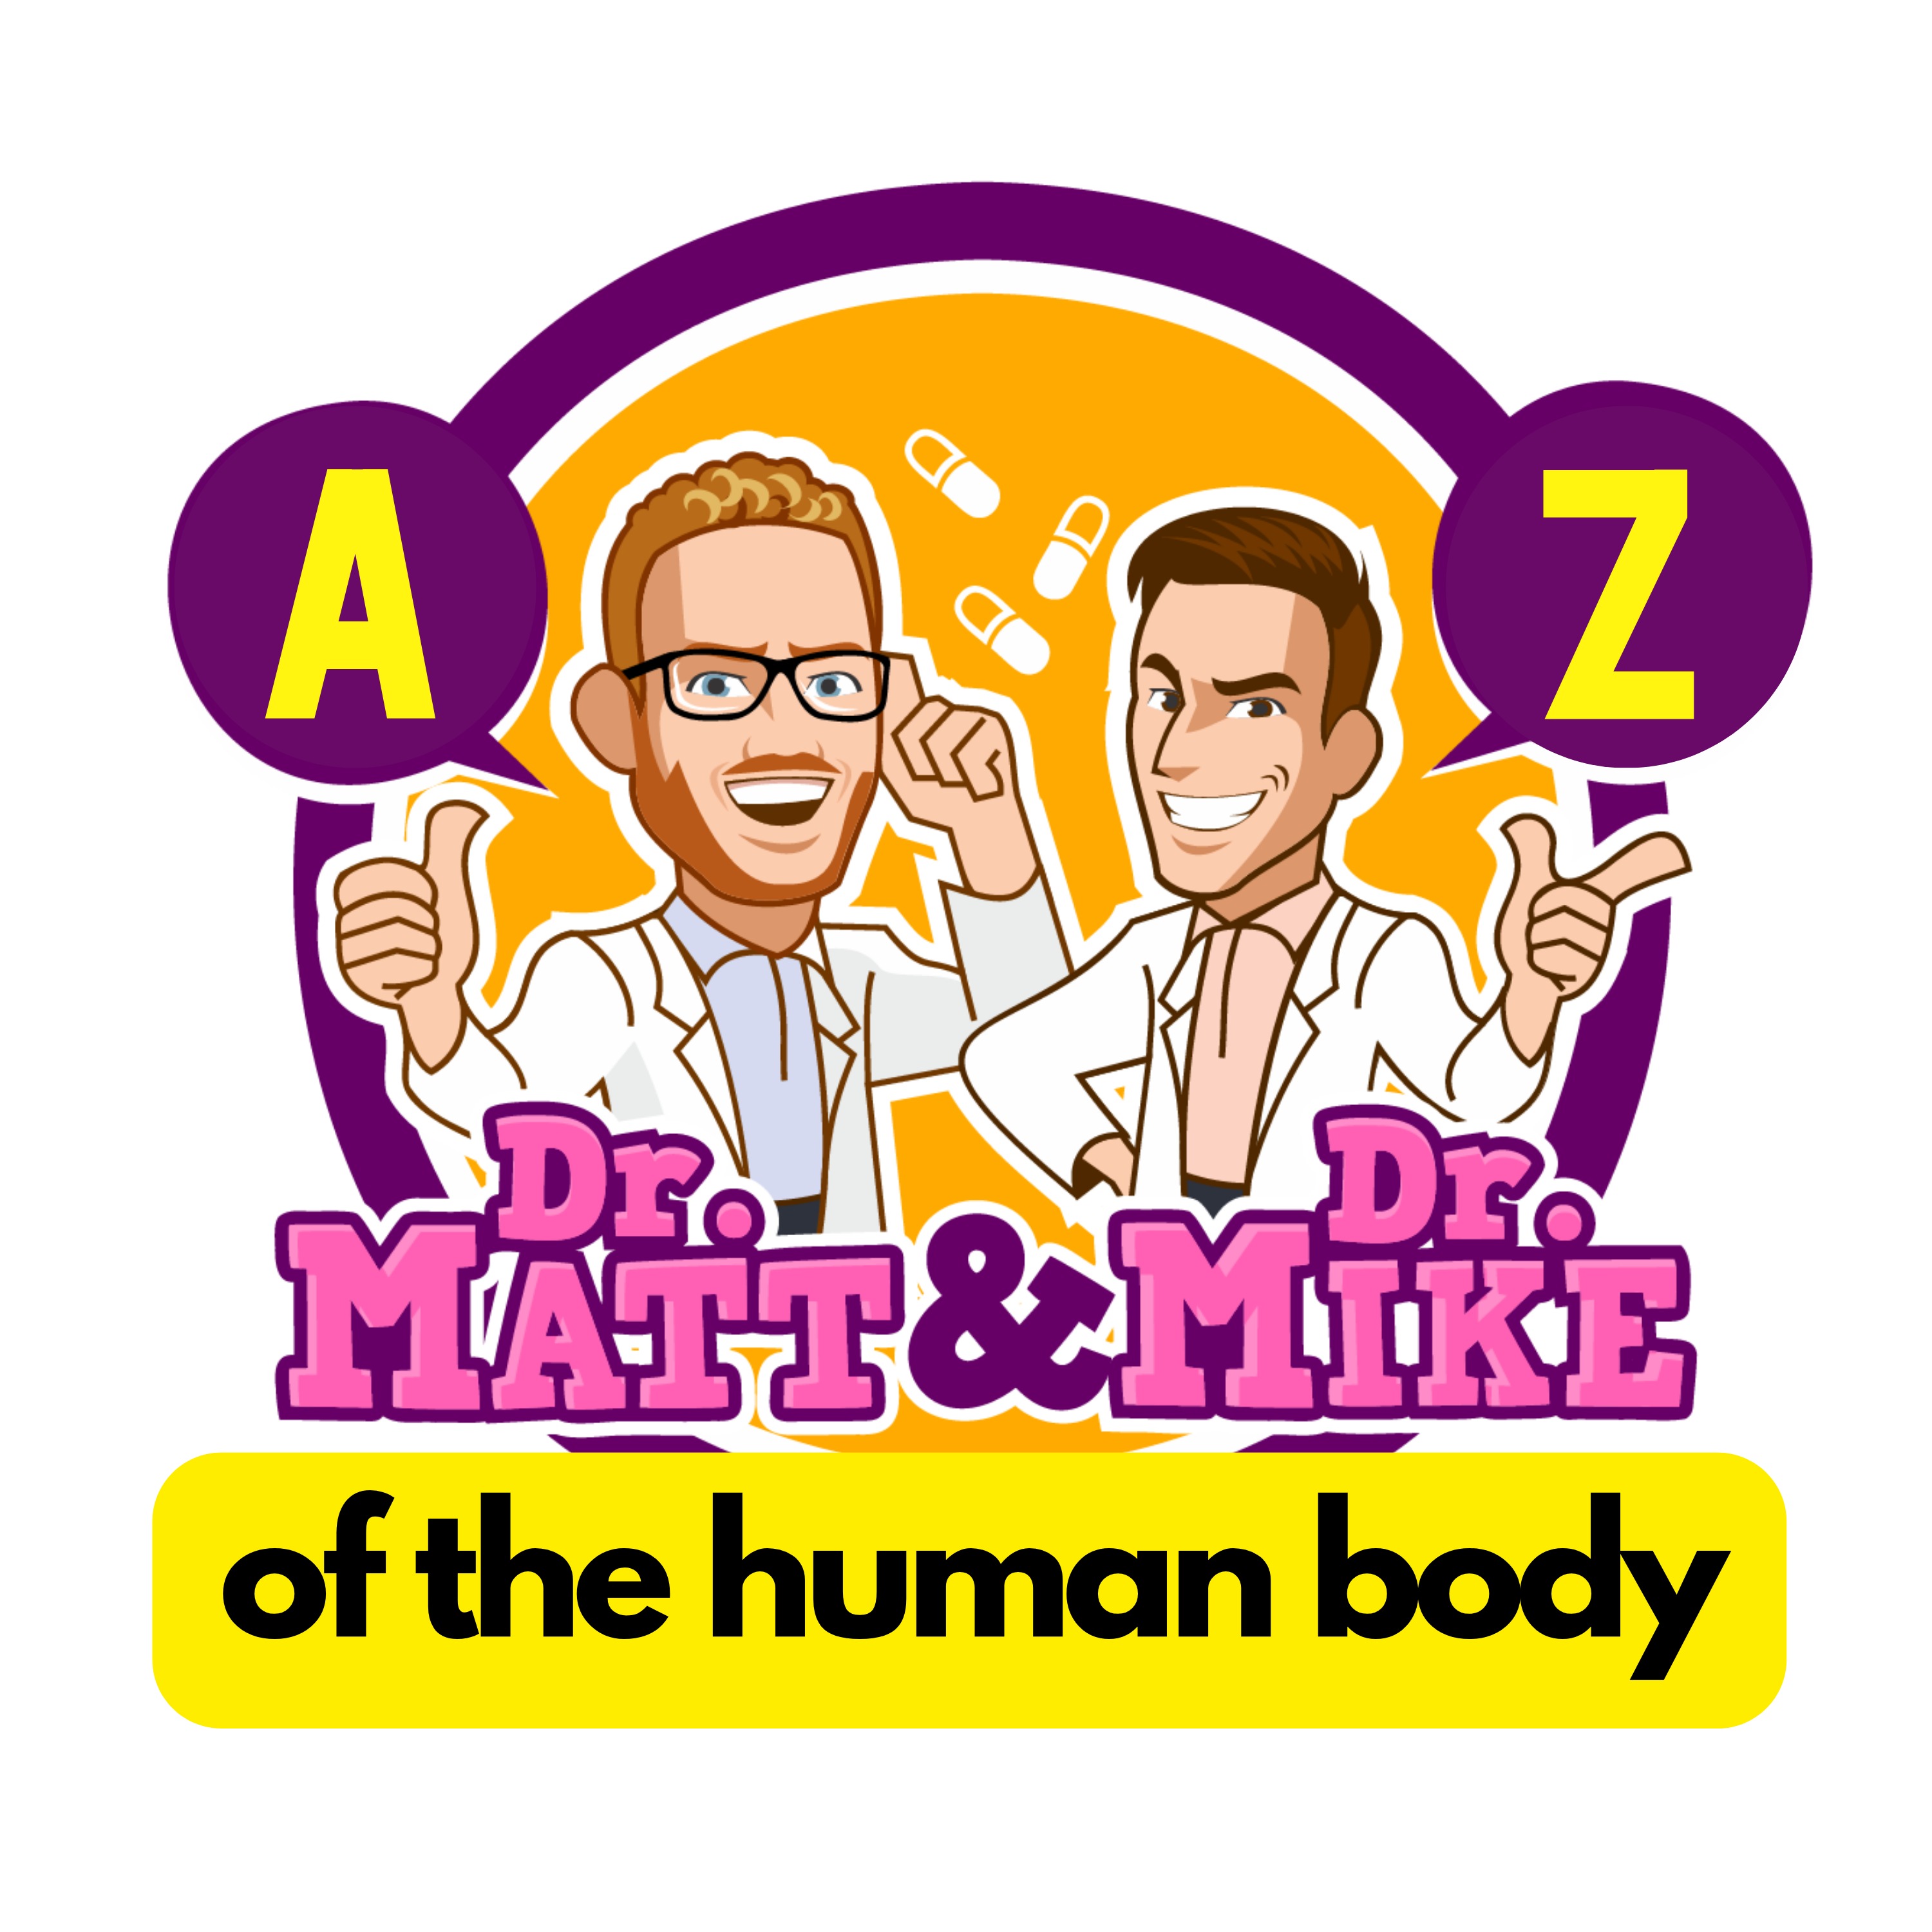 Accessory Reproductive Organs (Male & Female) | A-Z of the Human Body